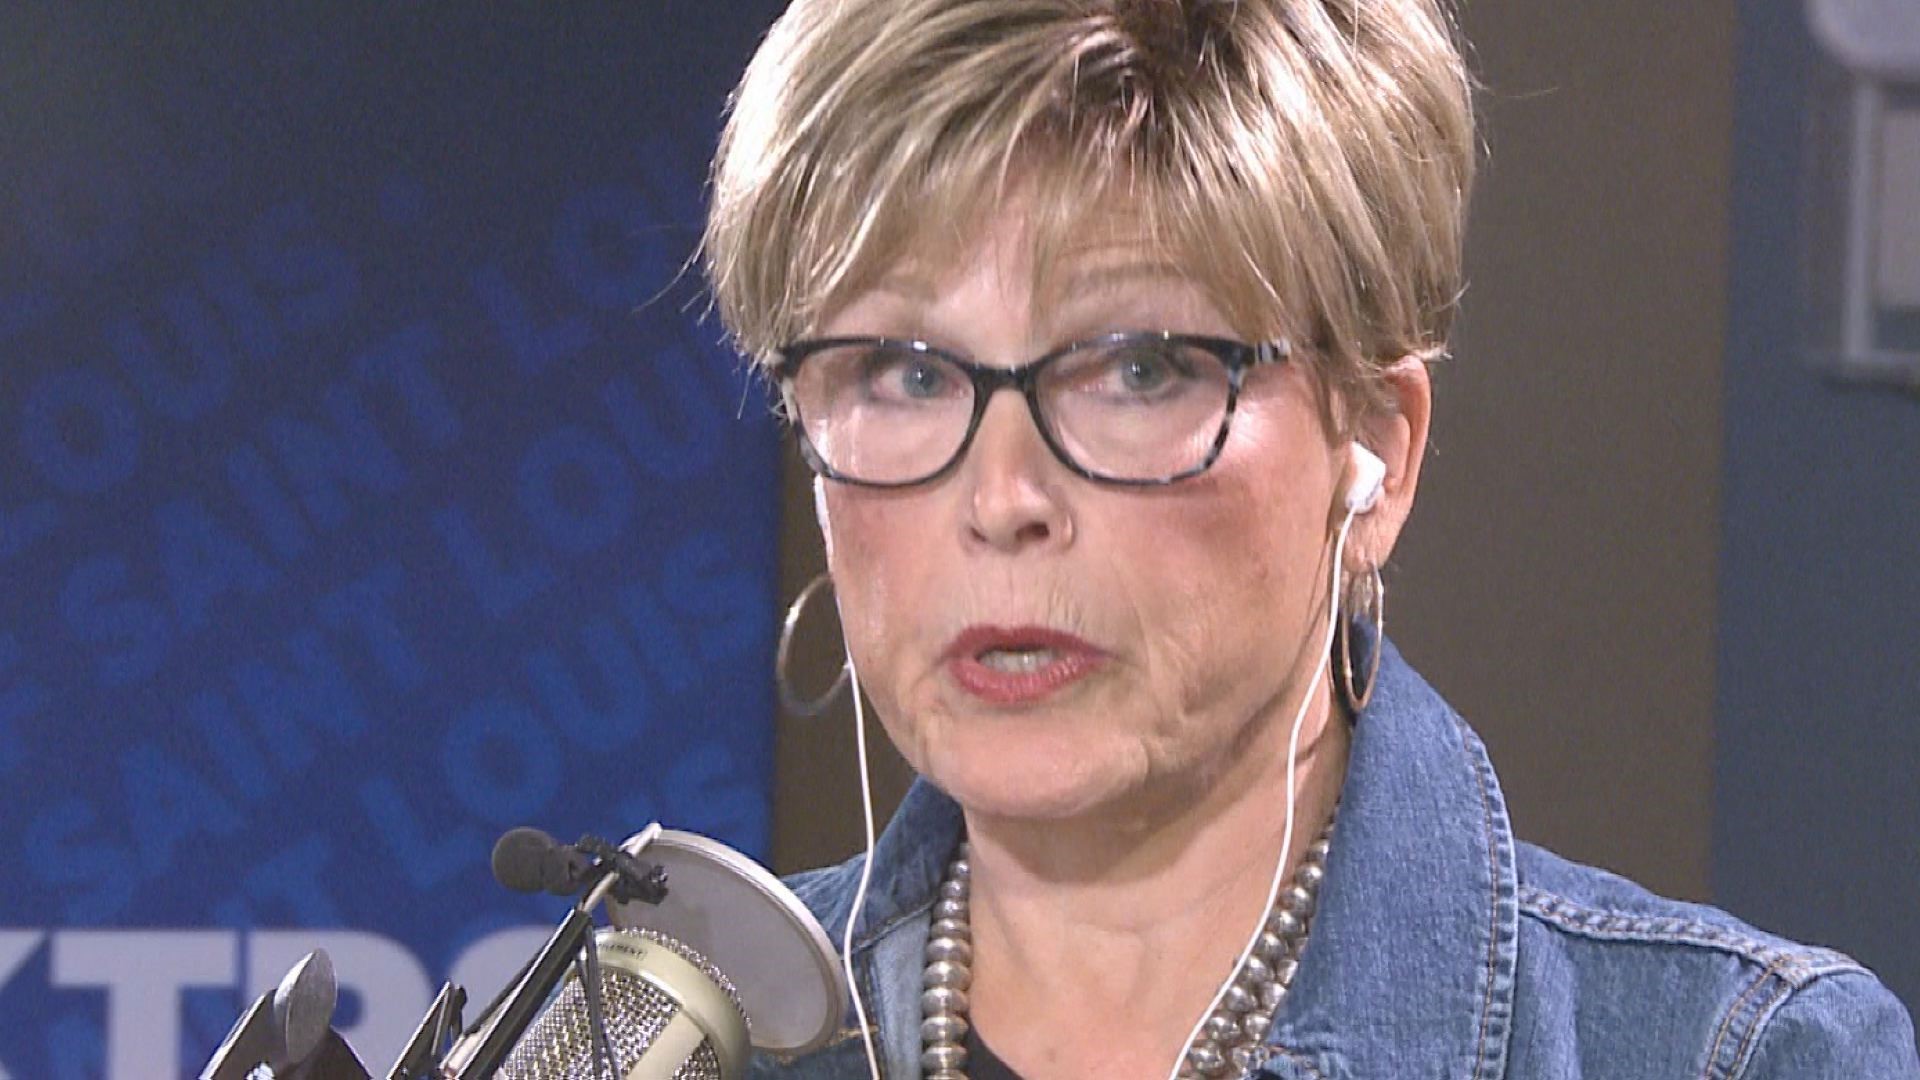 The longtime KSDK news anchor reflects on her role in the controversial resignation.